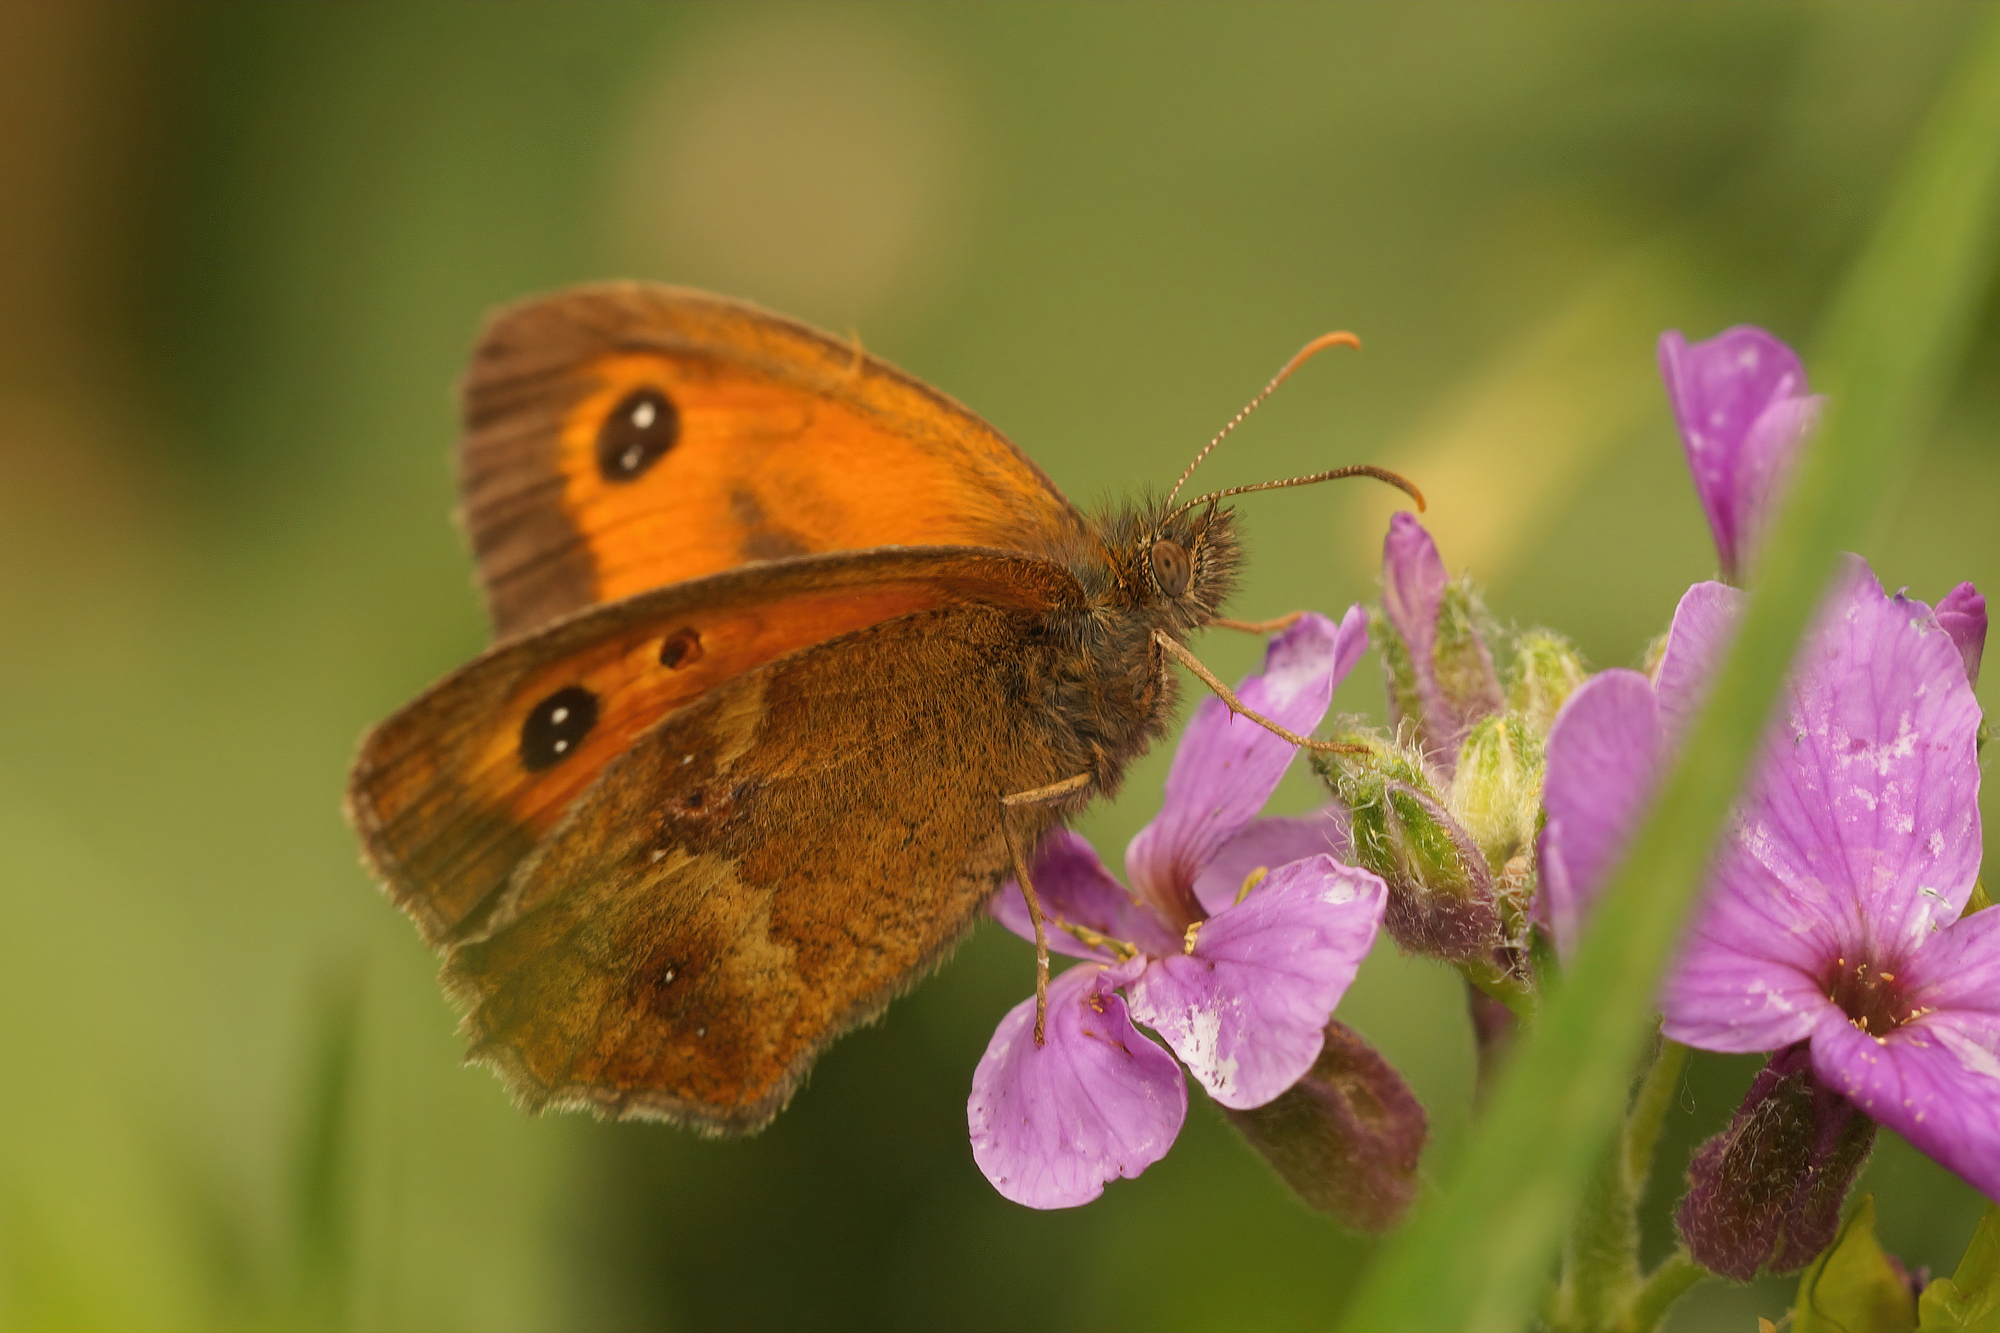 Closeup of the orange Gatekeeper butterfly, Pyronia tithonus sitting on a purple flower in the garden